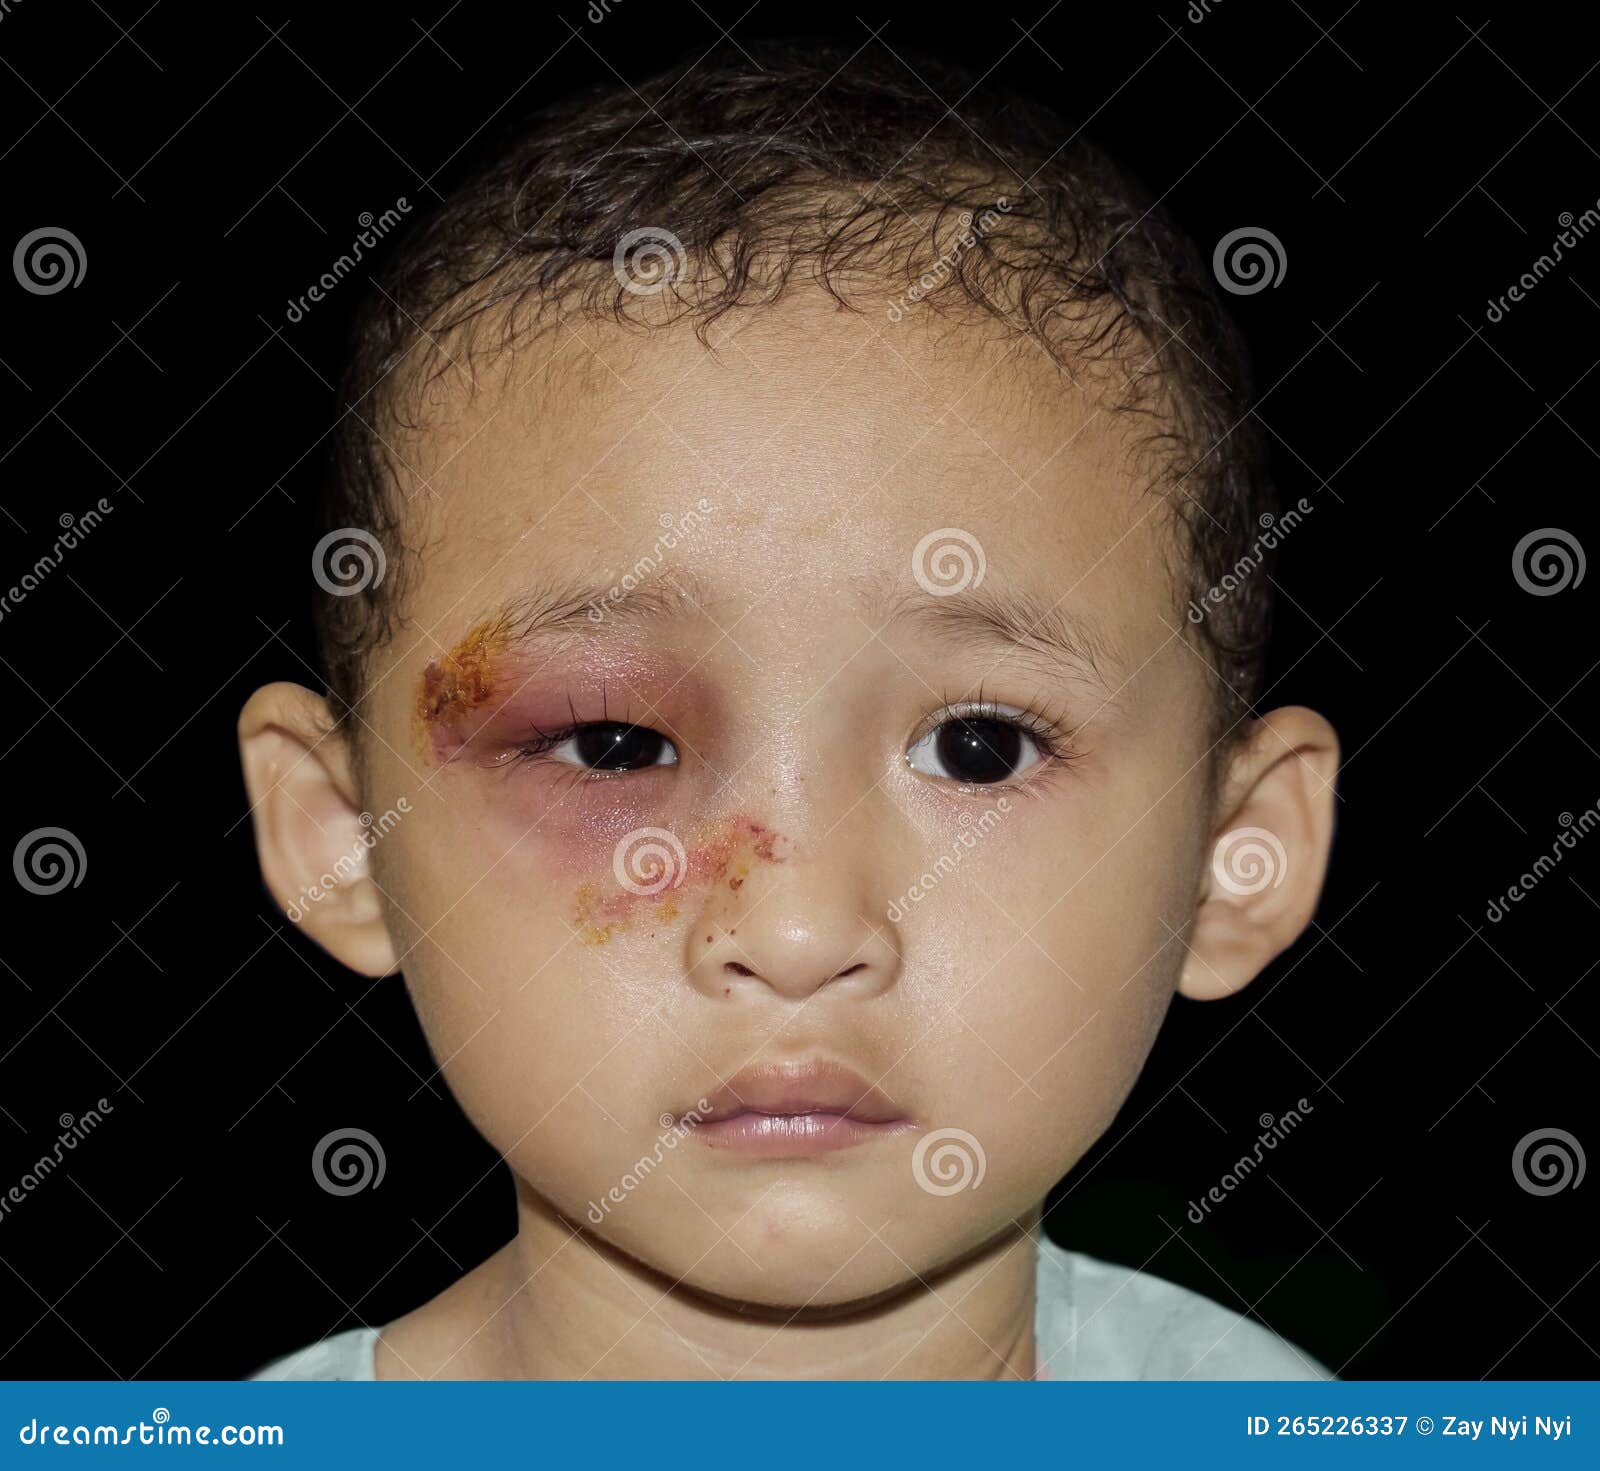 Collection 102+ Images photos of impetigo on the face Updated